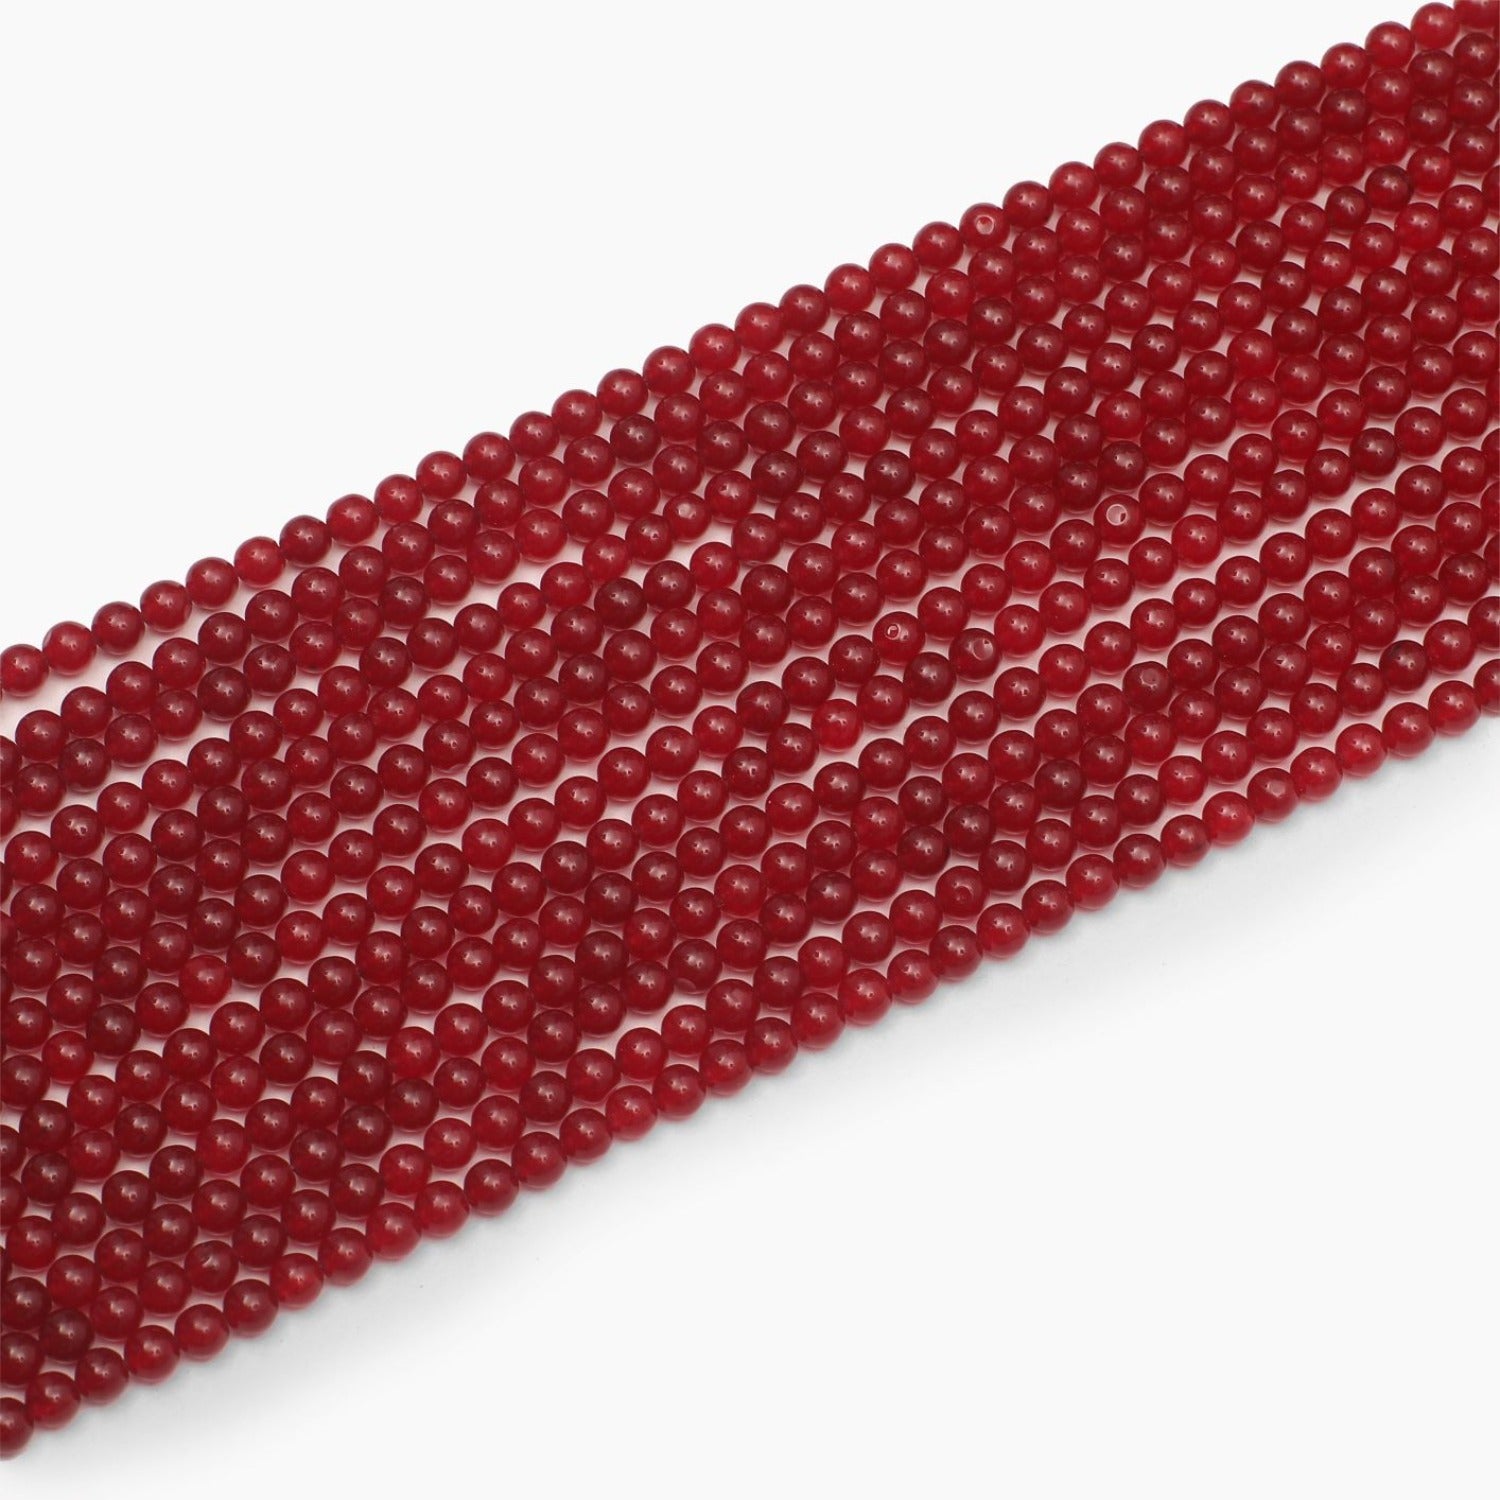 Red Jade Dyed Quartz 5mm Beads- Sold Per Strand